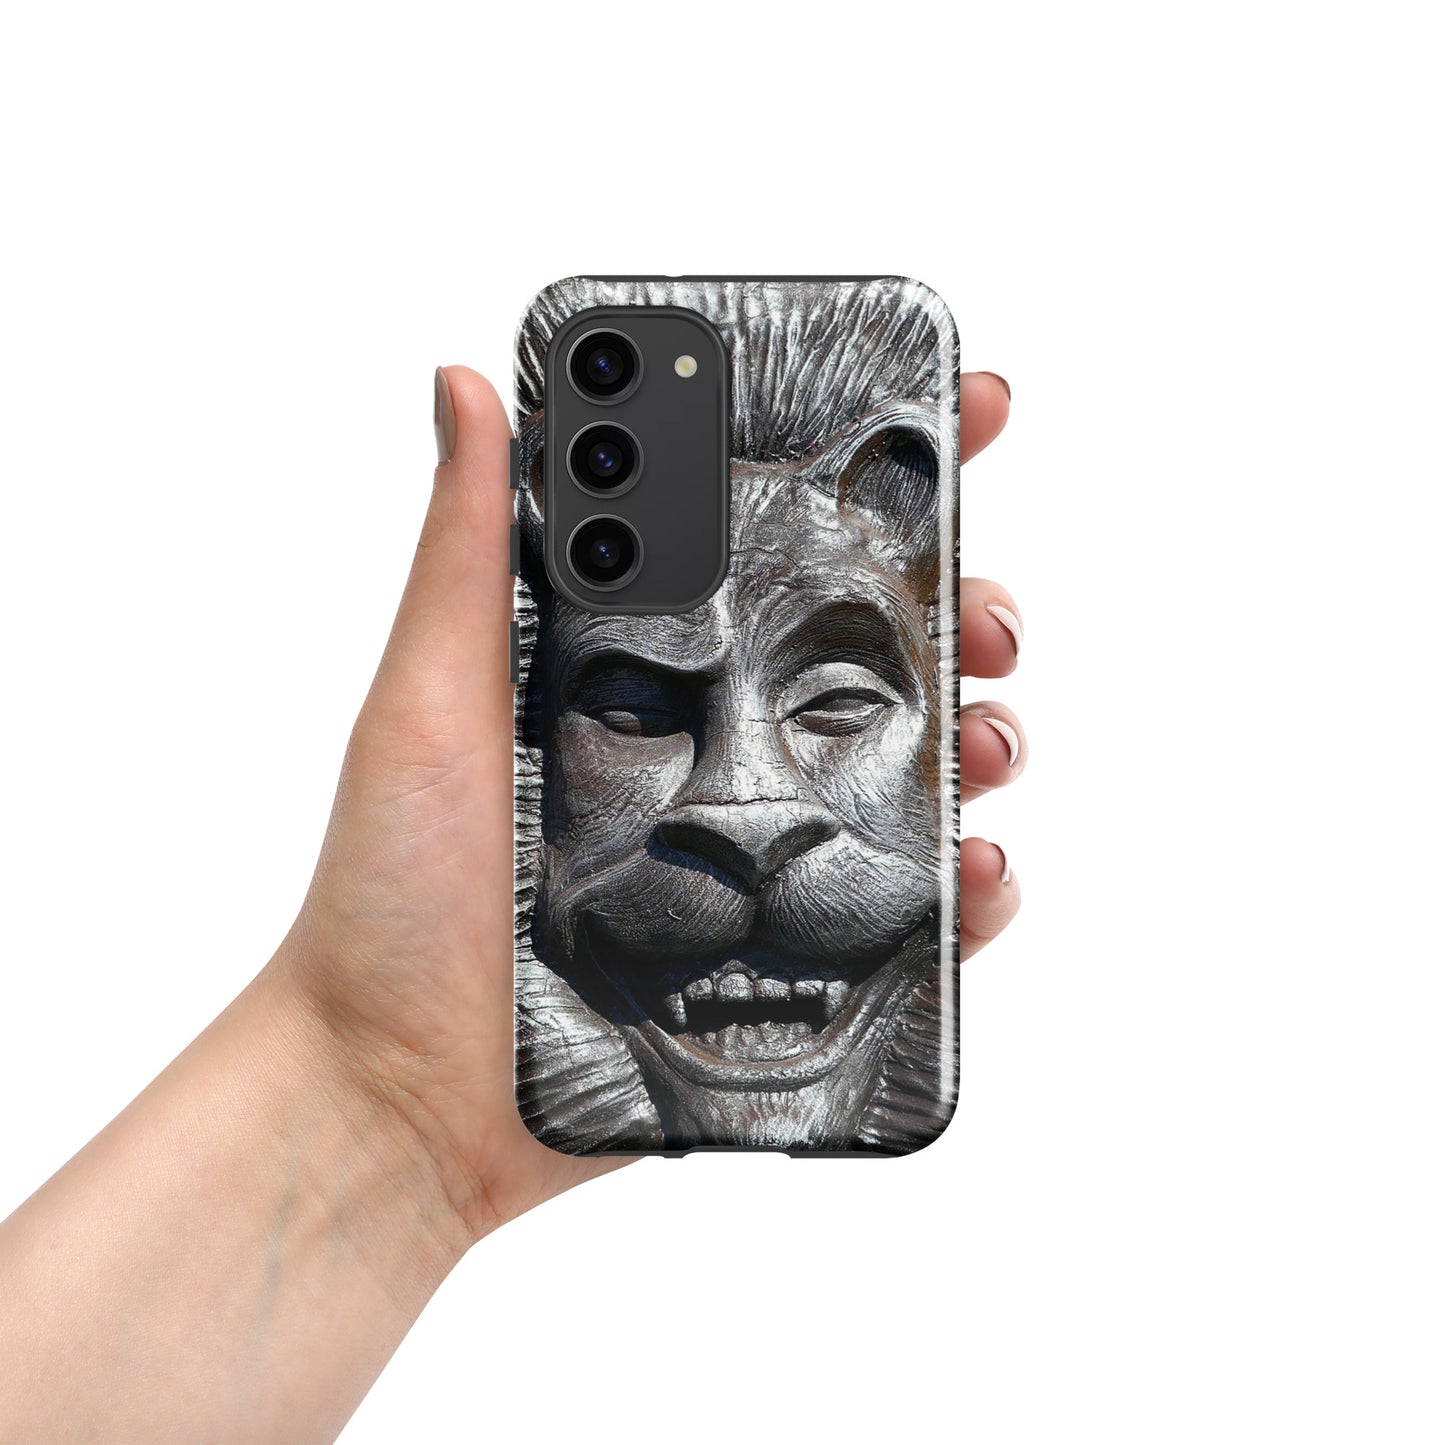 Lion's Friends Forever - Tough case for Samsung ( Galaxy S24 Ultra - Galaxy S10 ) - Fry1Productions